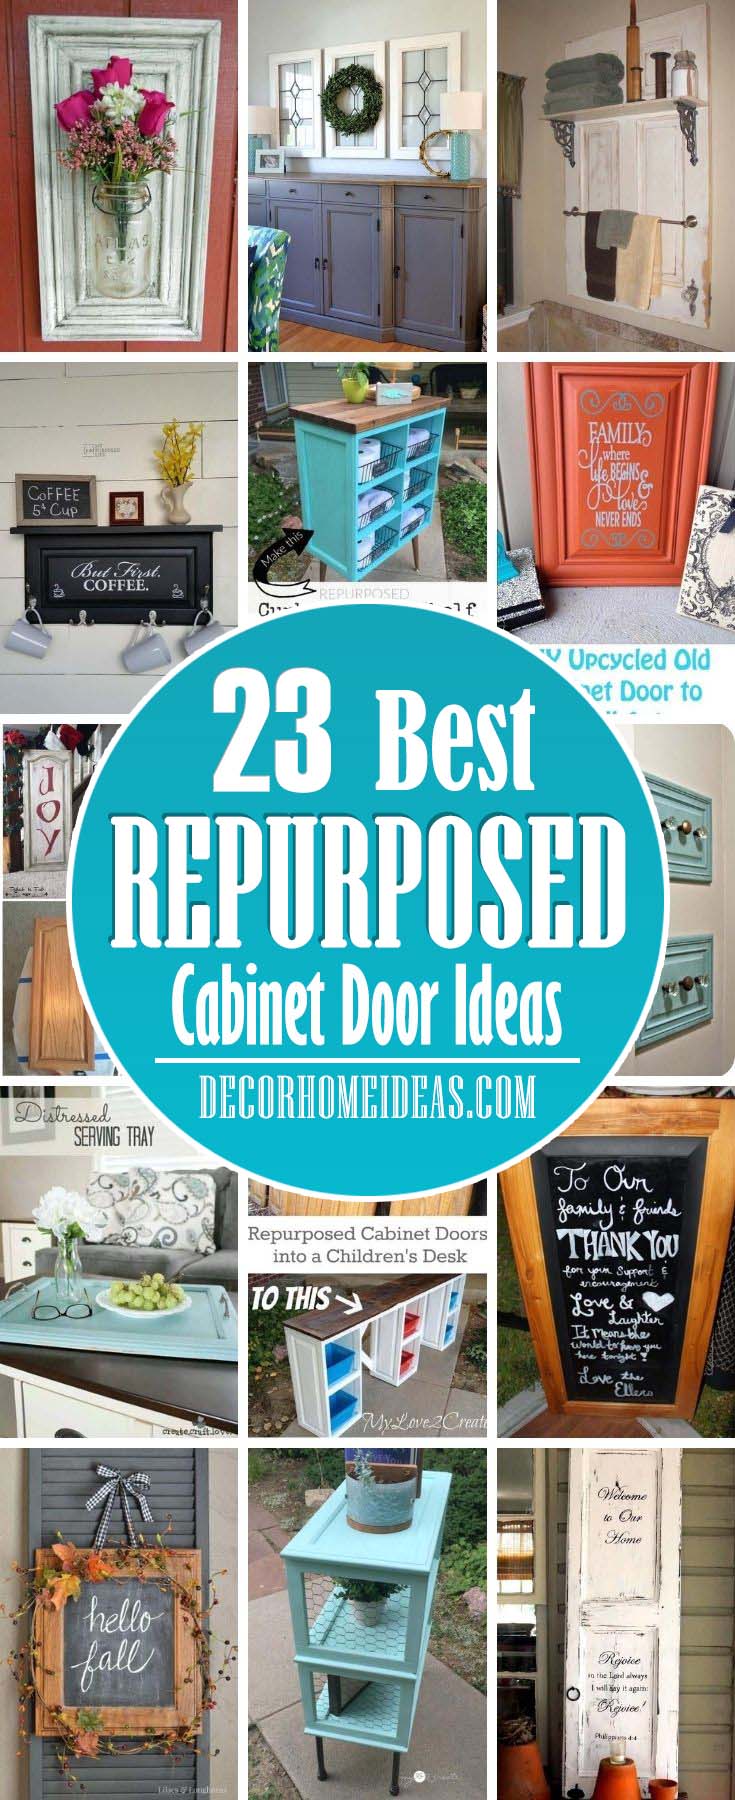 20 Best Repurposed Cabinet Door Ideas That Are Easy To Do Decor Home